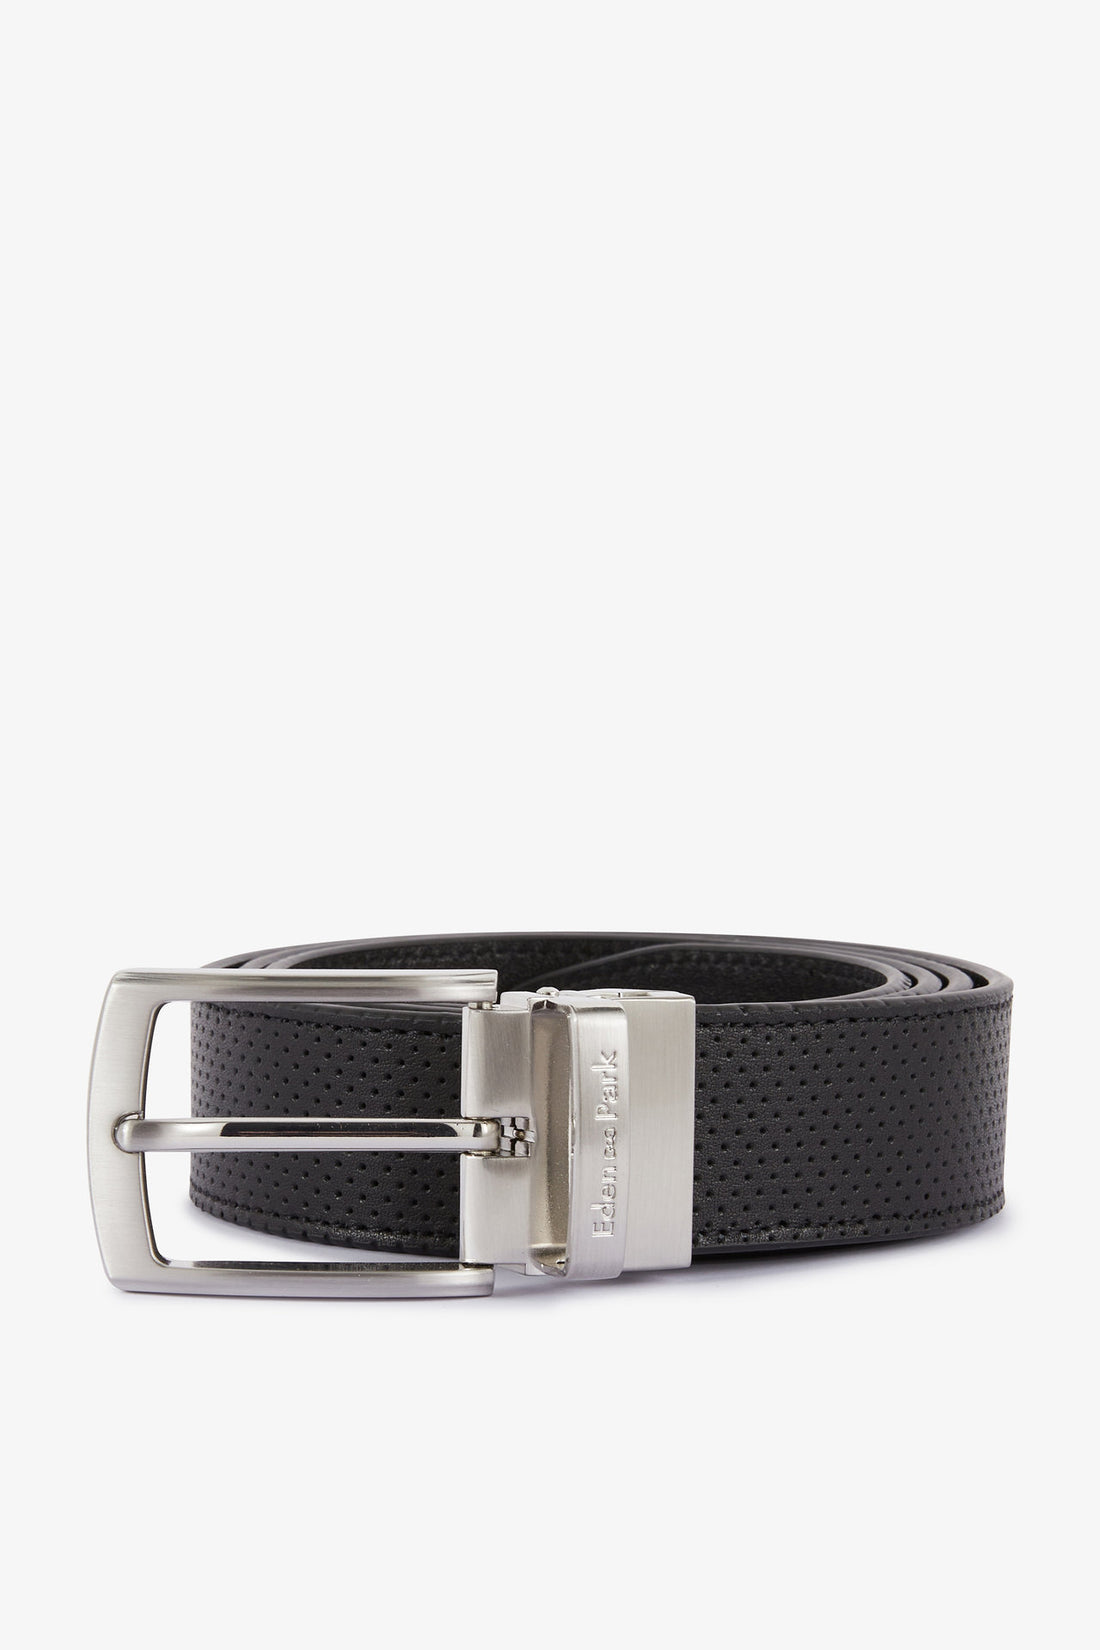 Black Leather Belt With 2 Metal Buckles_E24ACTPK0001_NO_01